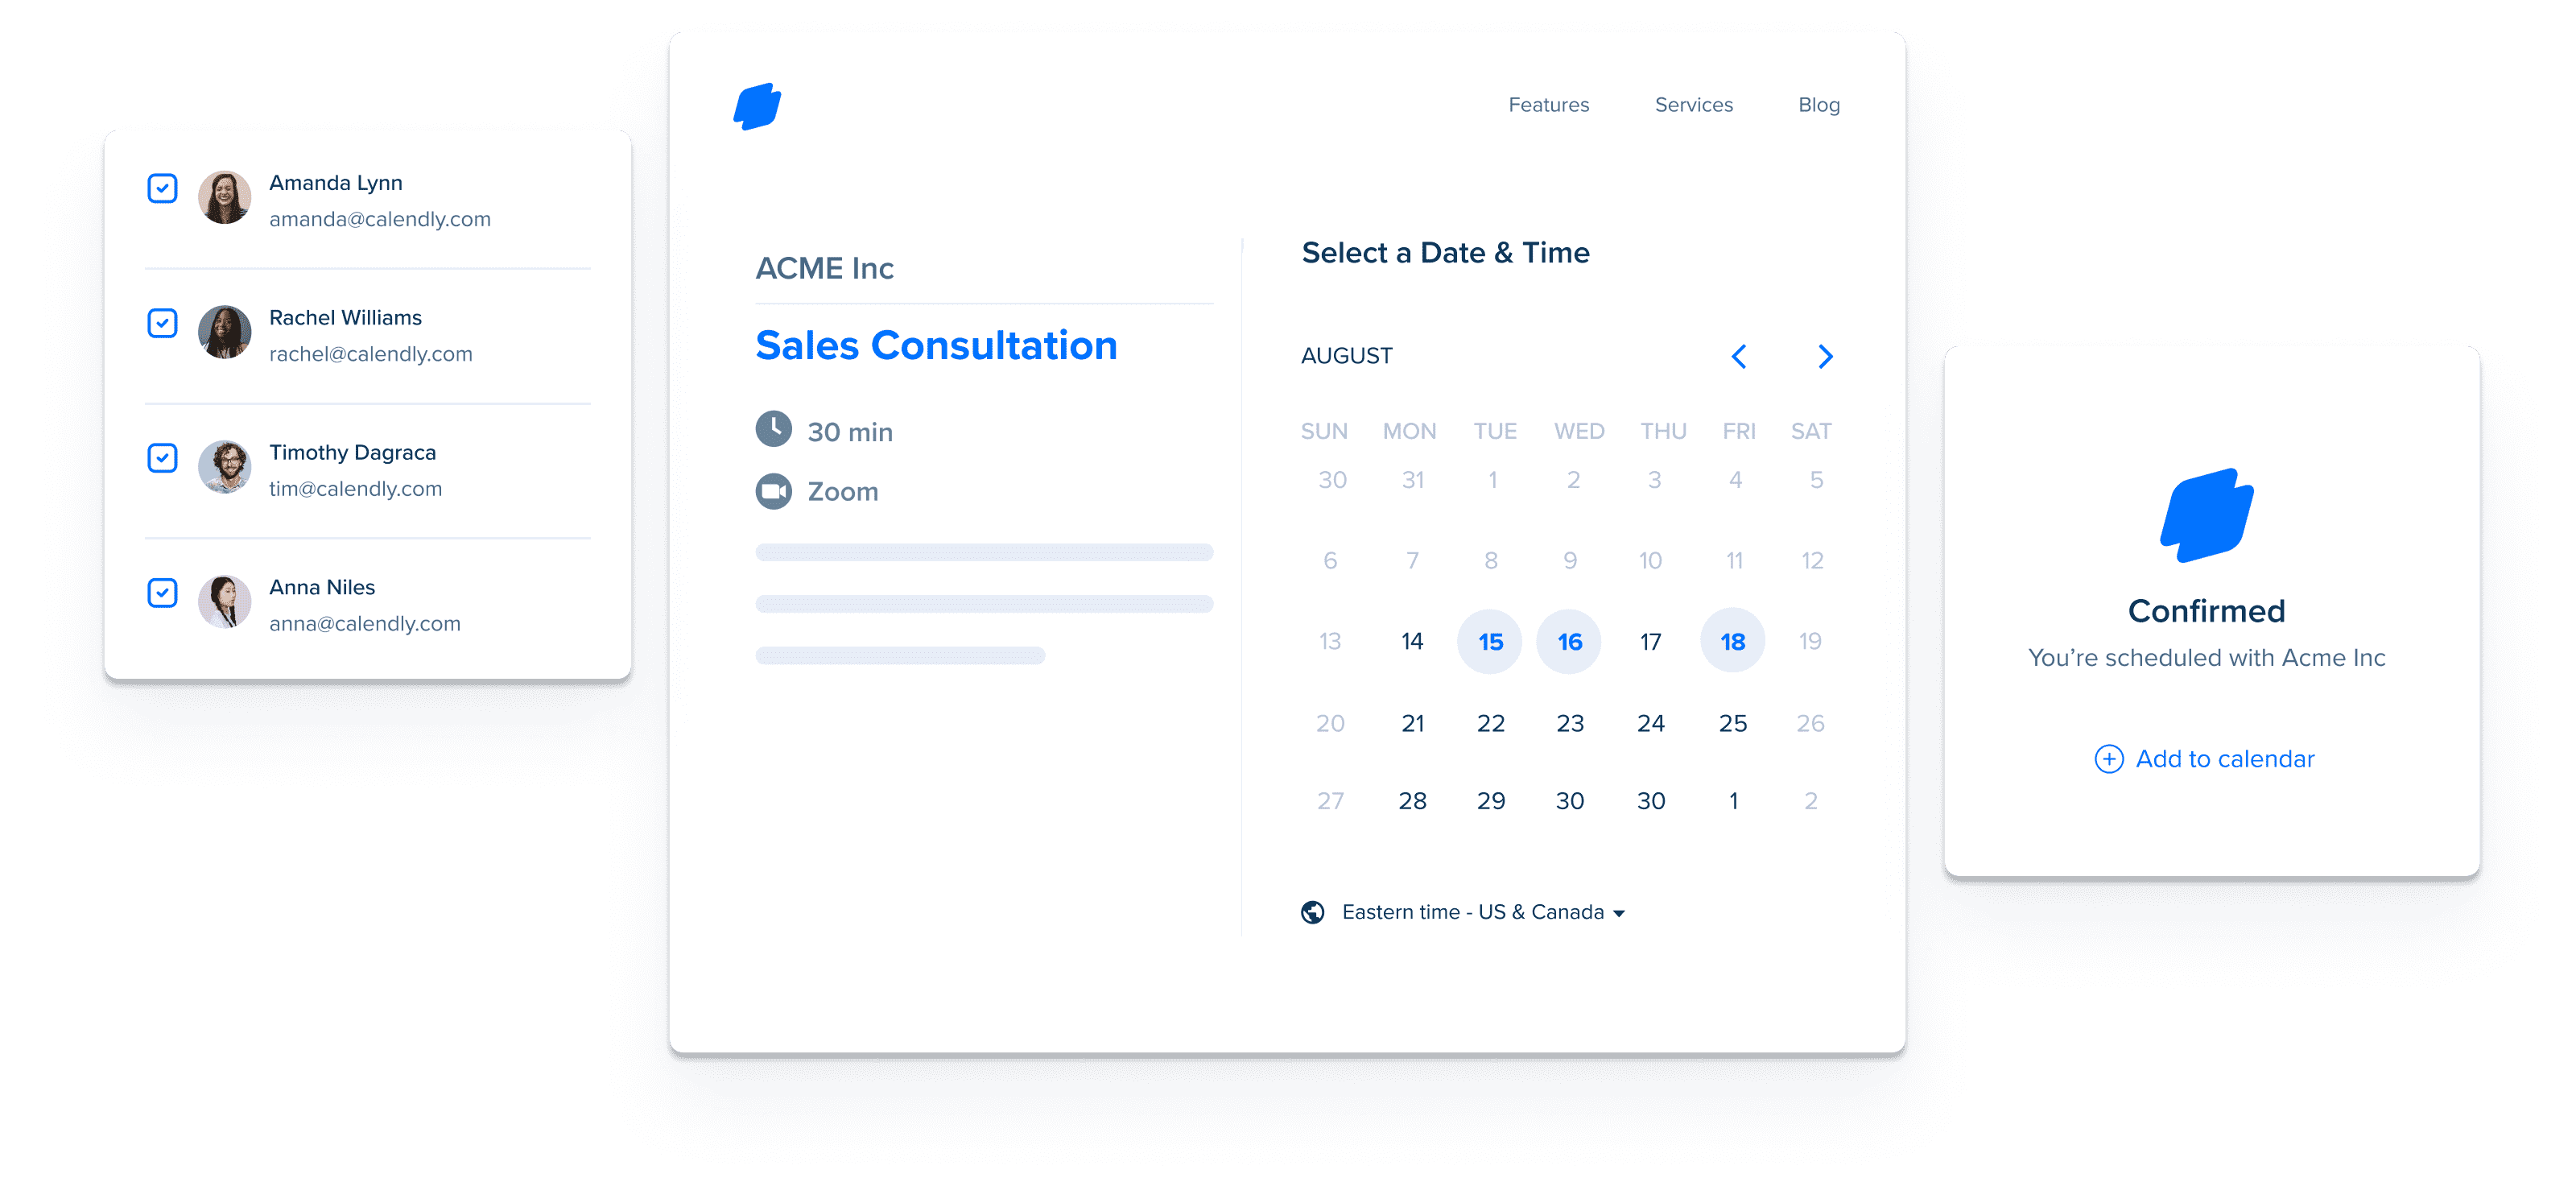 Calendly - One of the leading scheduling apps